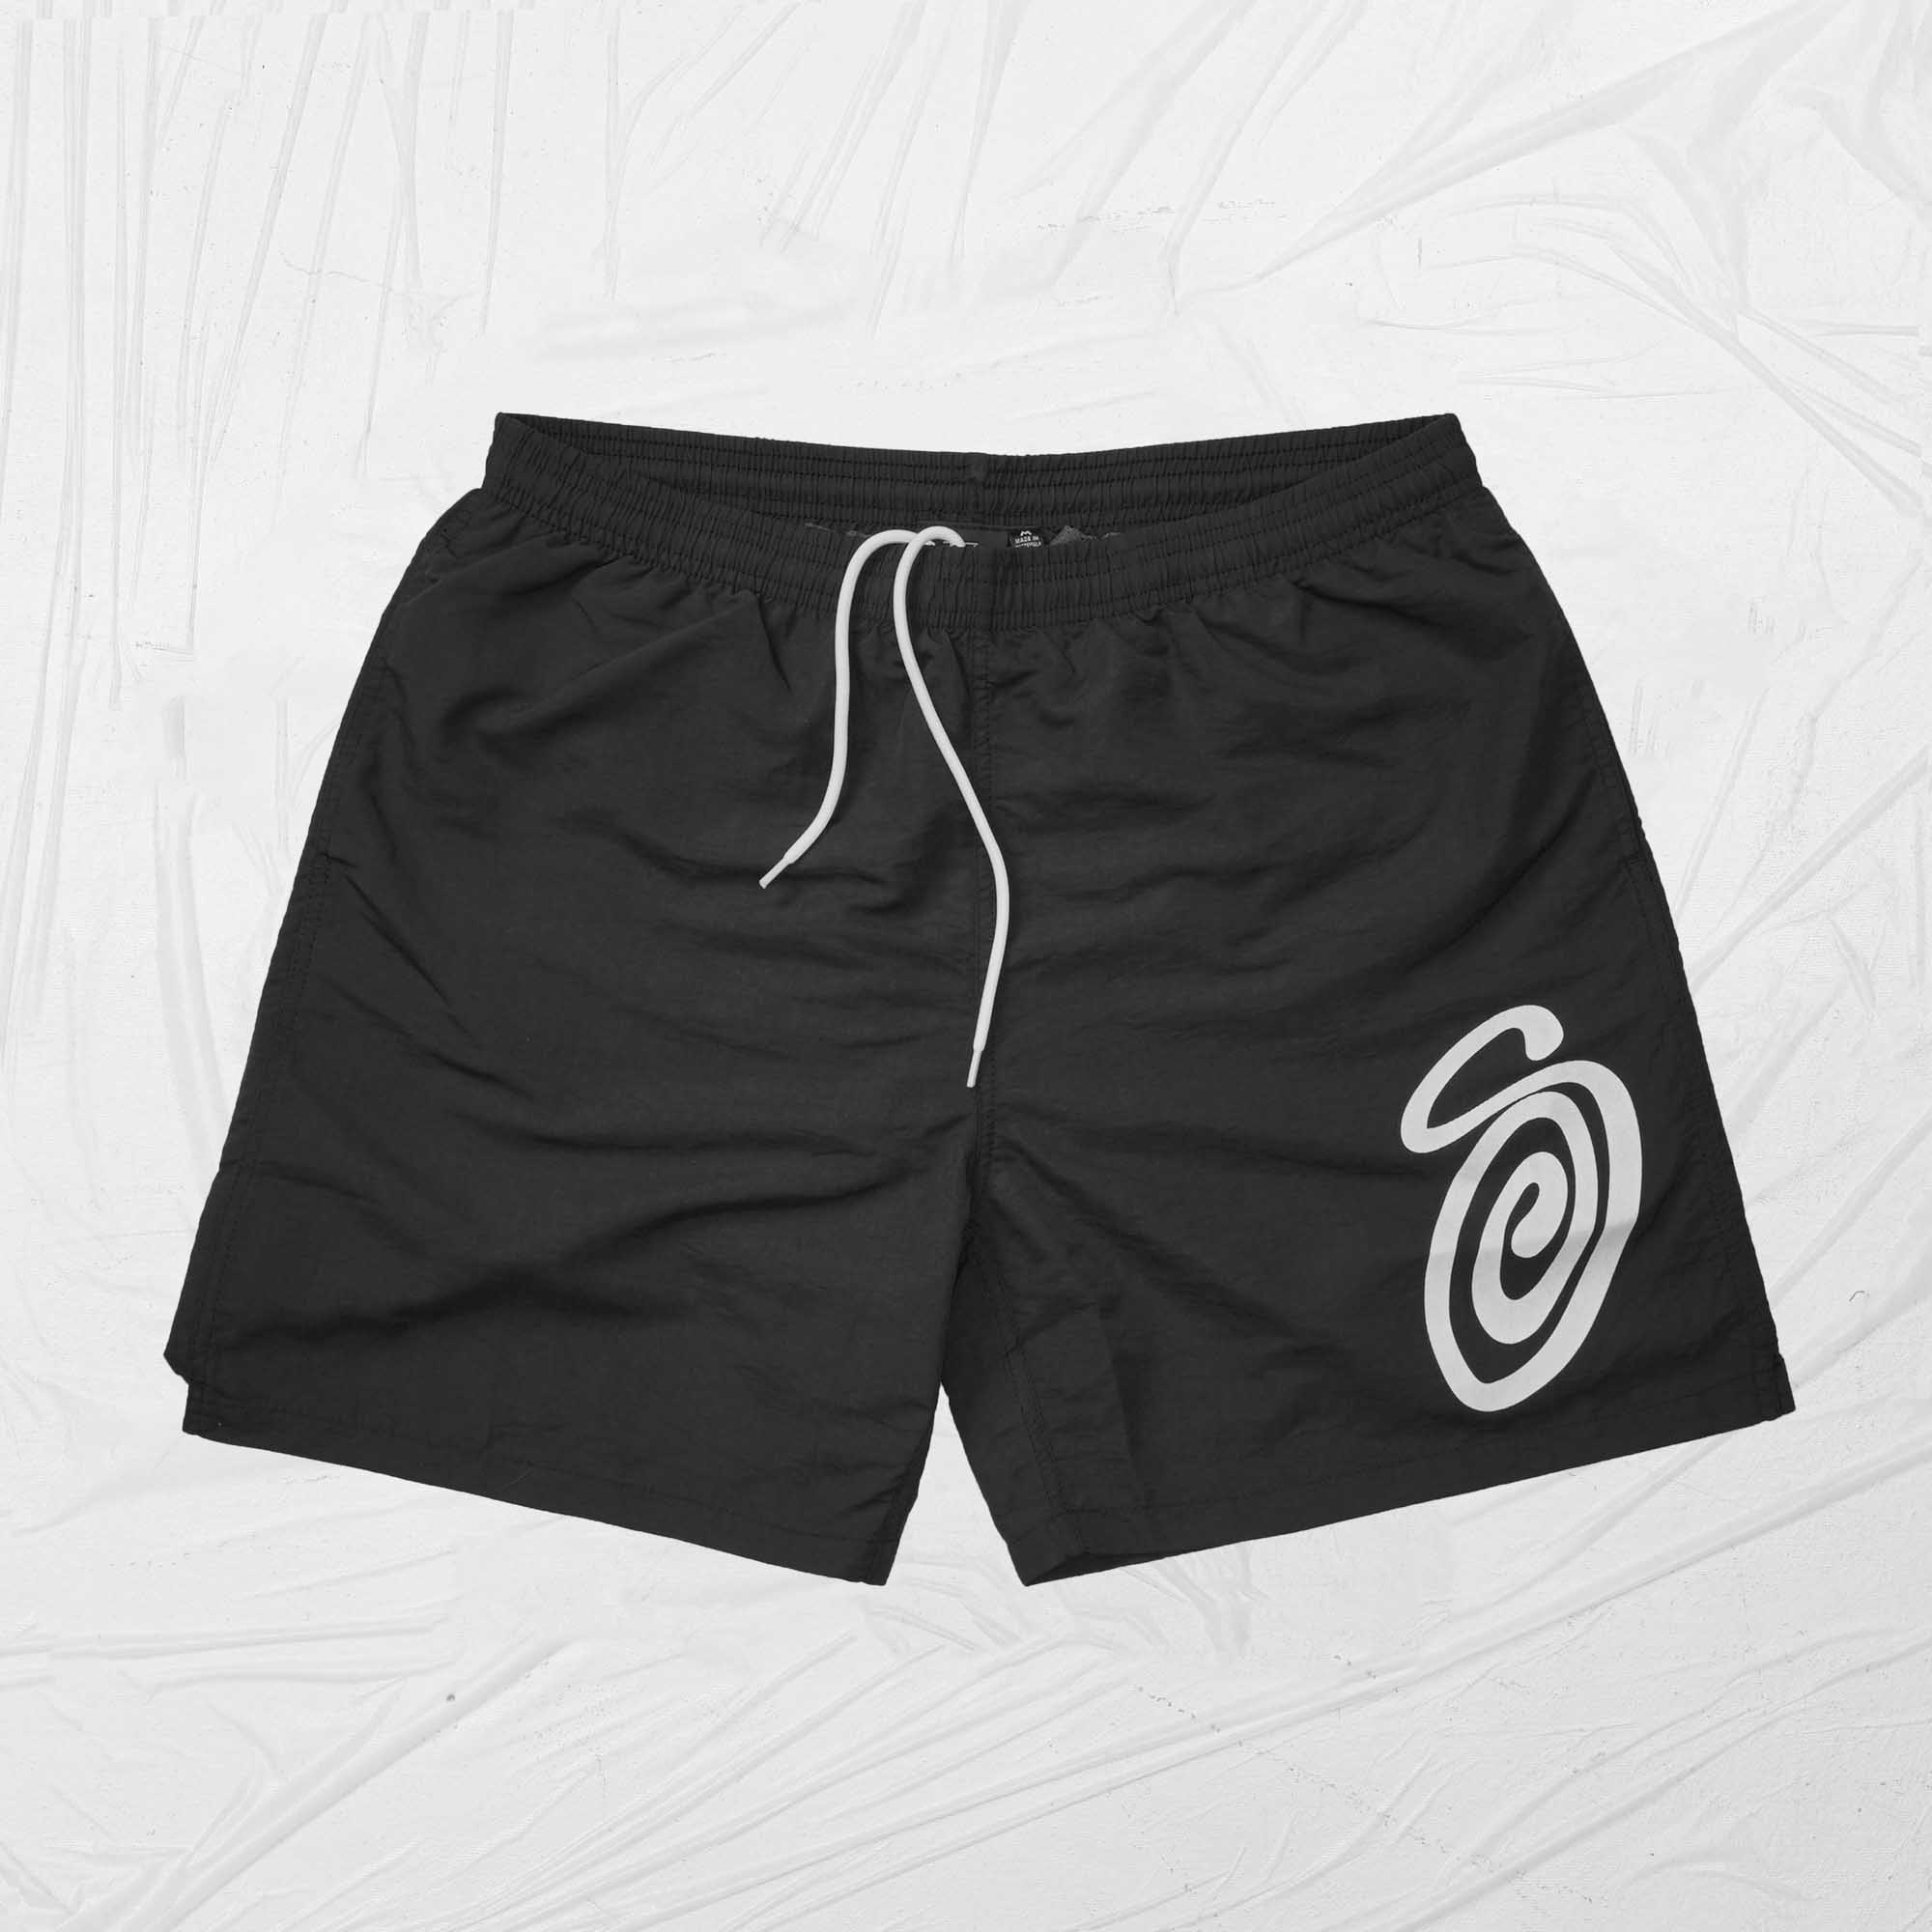 STUSSY CURLY S WATER SHORT - BLACK